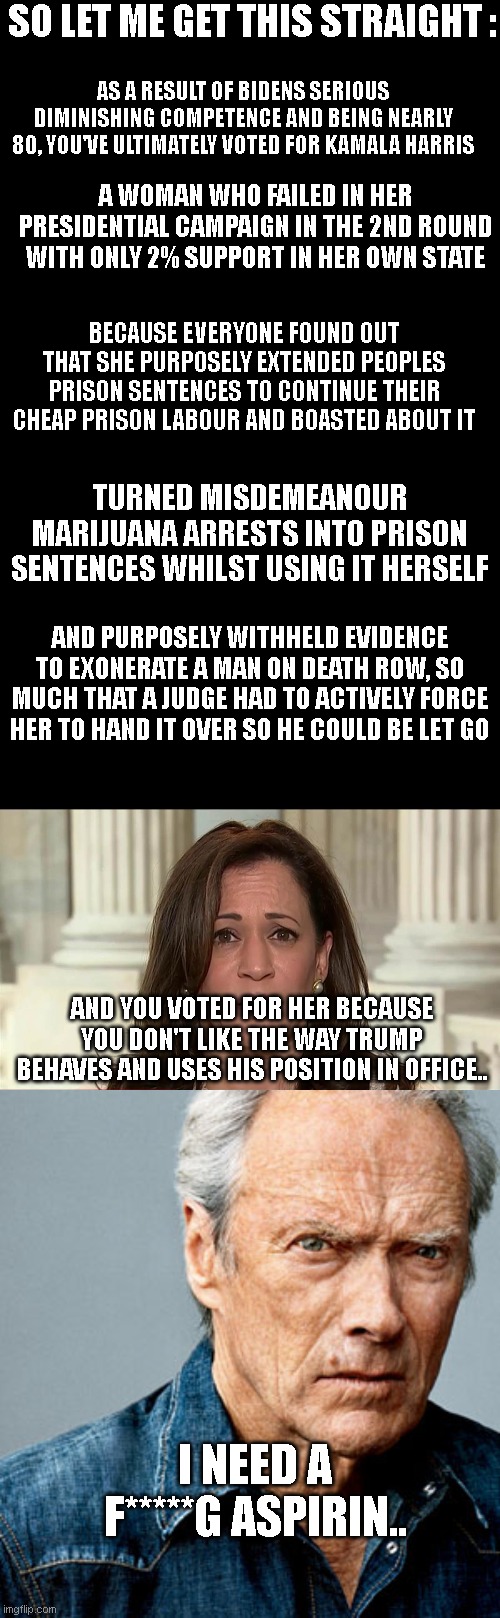  SO LET ME GET THIS STRAIGHT :; AS A RESULT OF BIDENS SERIOUS DIMINISHING COMPETENCE AND BEING NEARLY 80, YOU'VE ULTIMATELY VOTED FOR KAMALA HARRIS; A WOMAN WHO FAILED IN HER PRESIDENTIAL CAMPAIGN IN THE 2ND ROUND WITH ONLY 2% SUPPORT IN HER OWN STATE; BECAUSE EVERYONE FOUND OUT THAT SHE PURPOSELY EXTENDED PEOPLES PRISON SENTENCES TO CONTINUE THEIR CHEAP PRISON LABOUR AND BOASTED ABOUT IT; TURNED MISDEMEANOUR MARIJUANA ARRESTS INTO PRISON SENTENCES WHILST USING IT HERSELF; AND PURPOSELY WITHHELD EVIDENCE TO EXONERATE A MAN ON DEATH ROW, SO MUCH THAT A JUDGE HAD TO ACTIVELY FORCE HER TO HAND IT OVER SO HE COULD BE LET GO; AND YOU VOTED FOR HER BECAUSE YOU DON'T LIKE THE WAY TRUMP BEHAVES AND USES HIS POSITION IN OFFICE.. I NEED A F*****G ASPIRIN.. | image tagged in kamala harris,clint eastwood | made w/ Imgflip meme maker